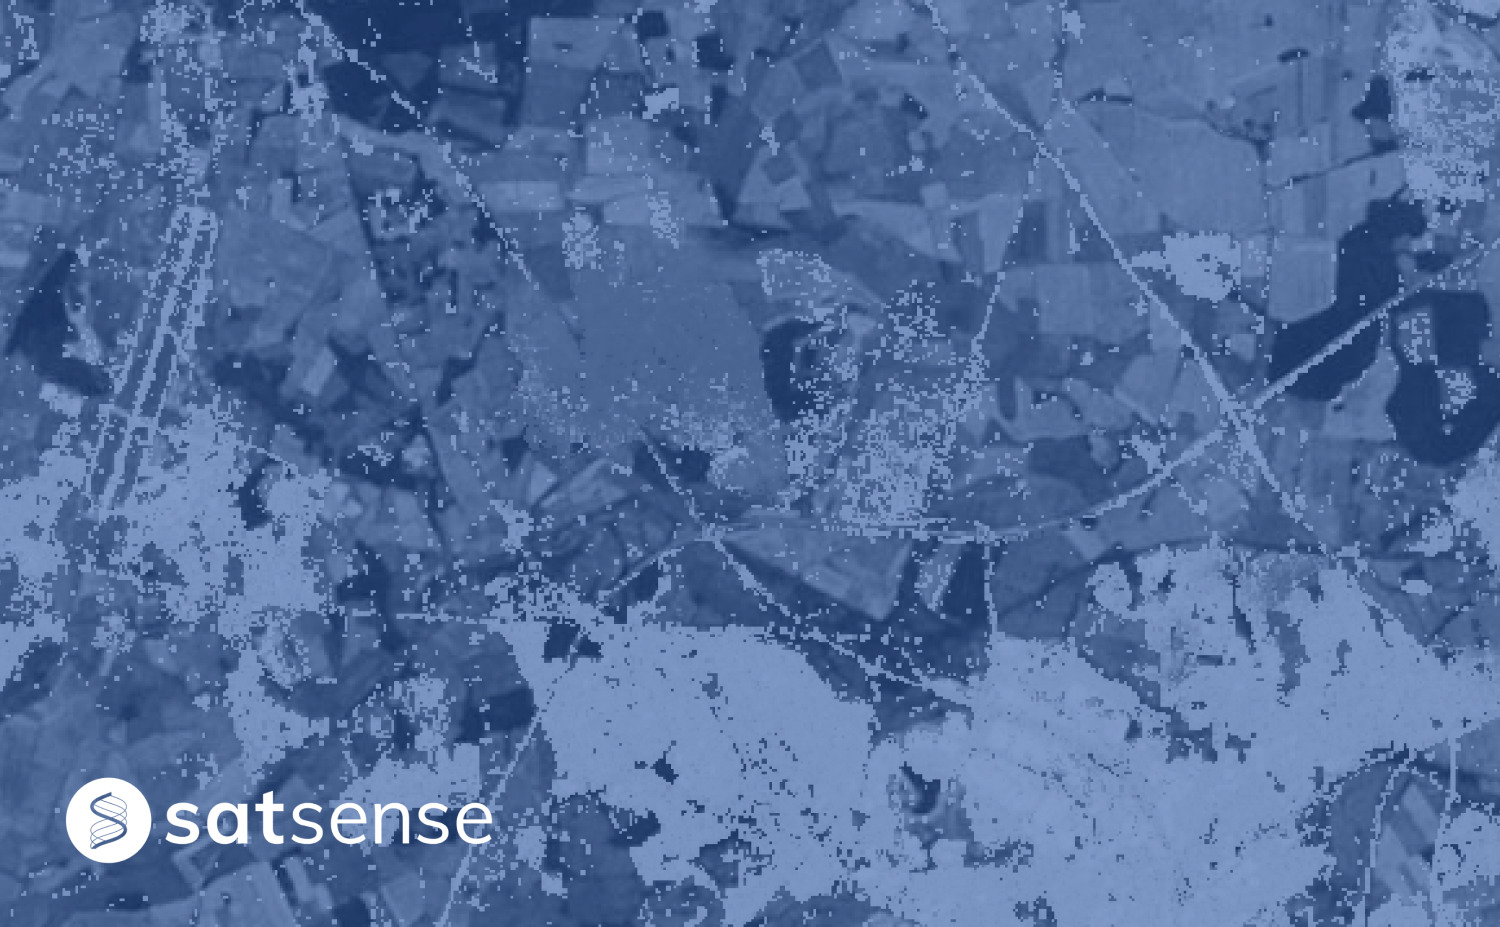 Top view of a large region with InSAR data points with SatSense logo on the bottom left corner